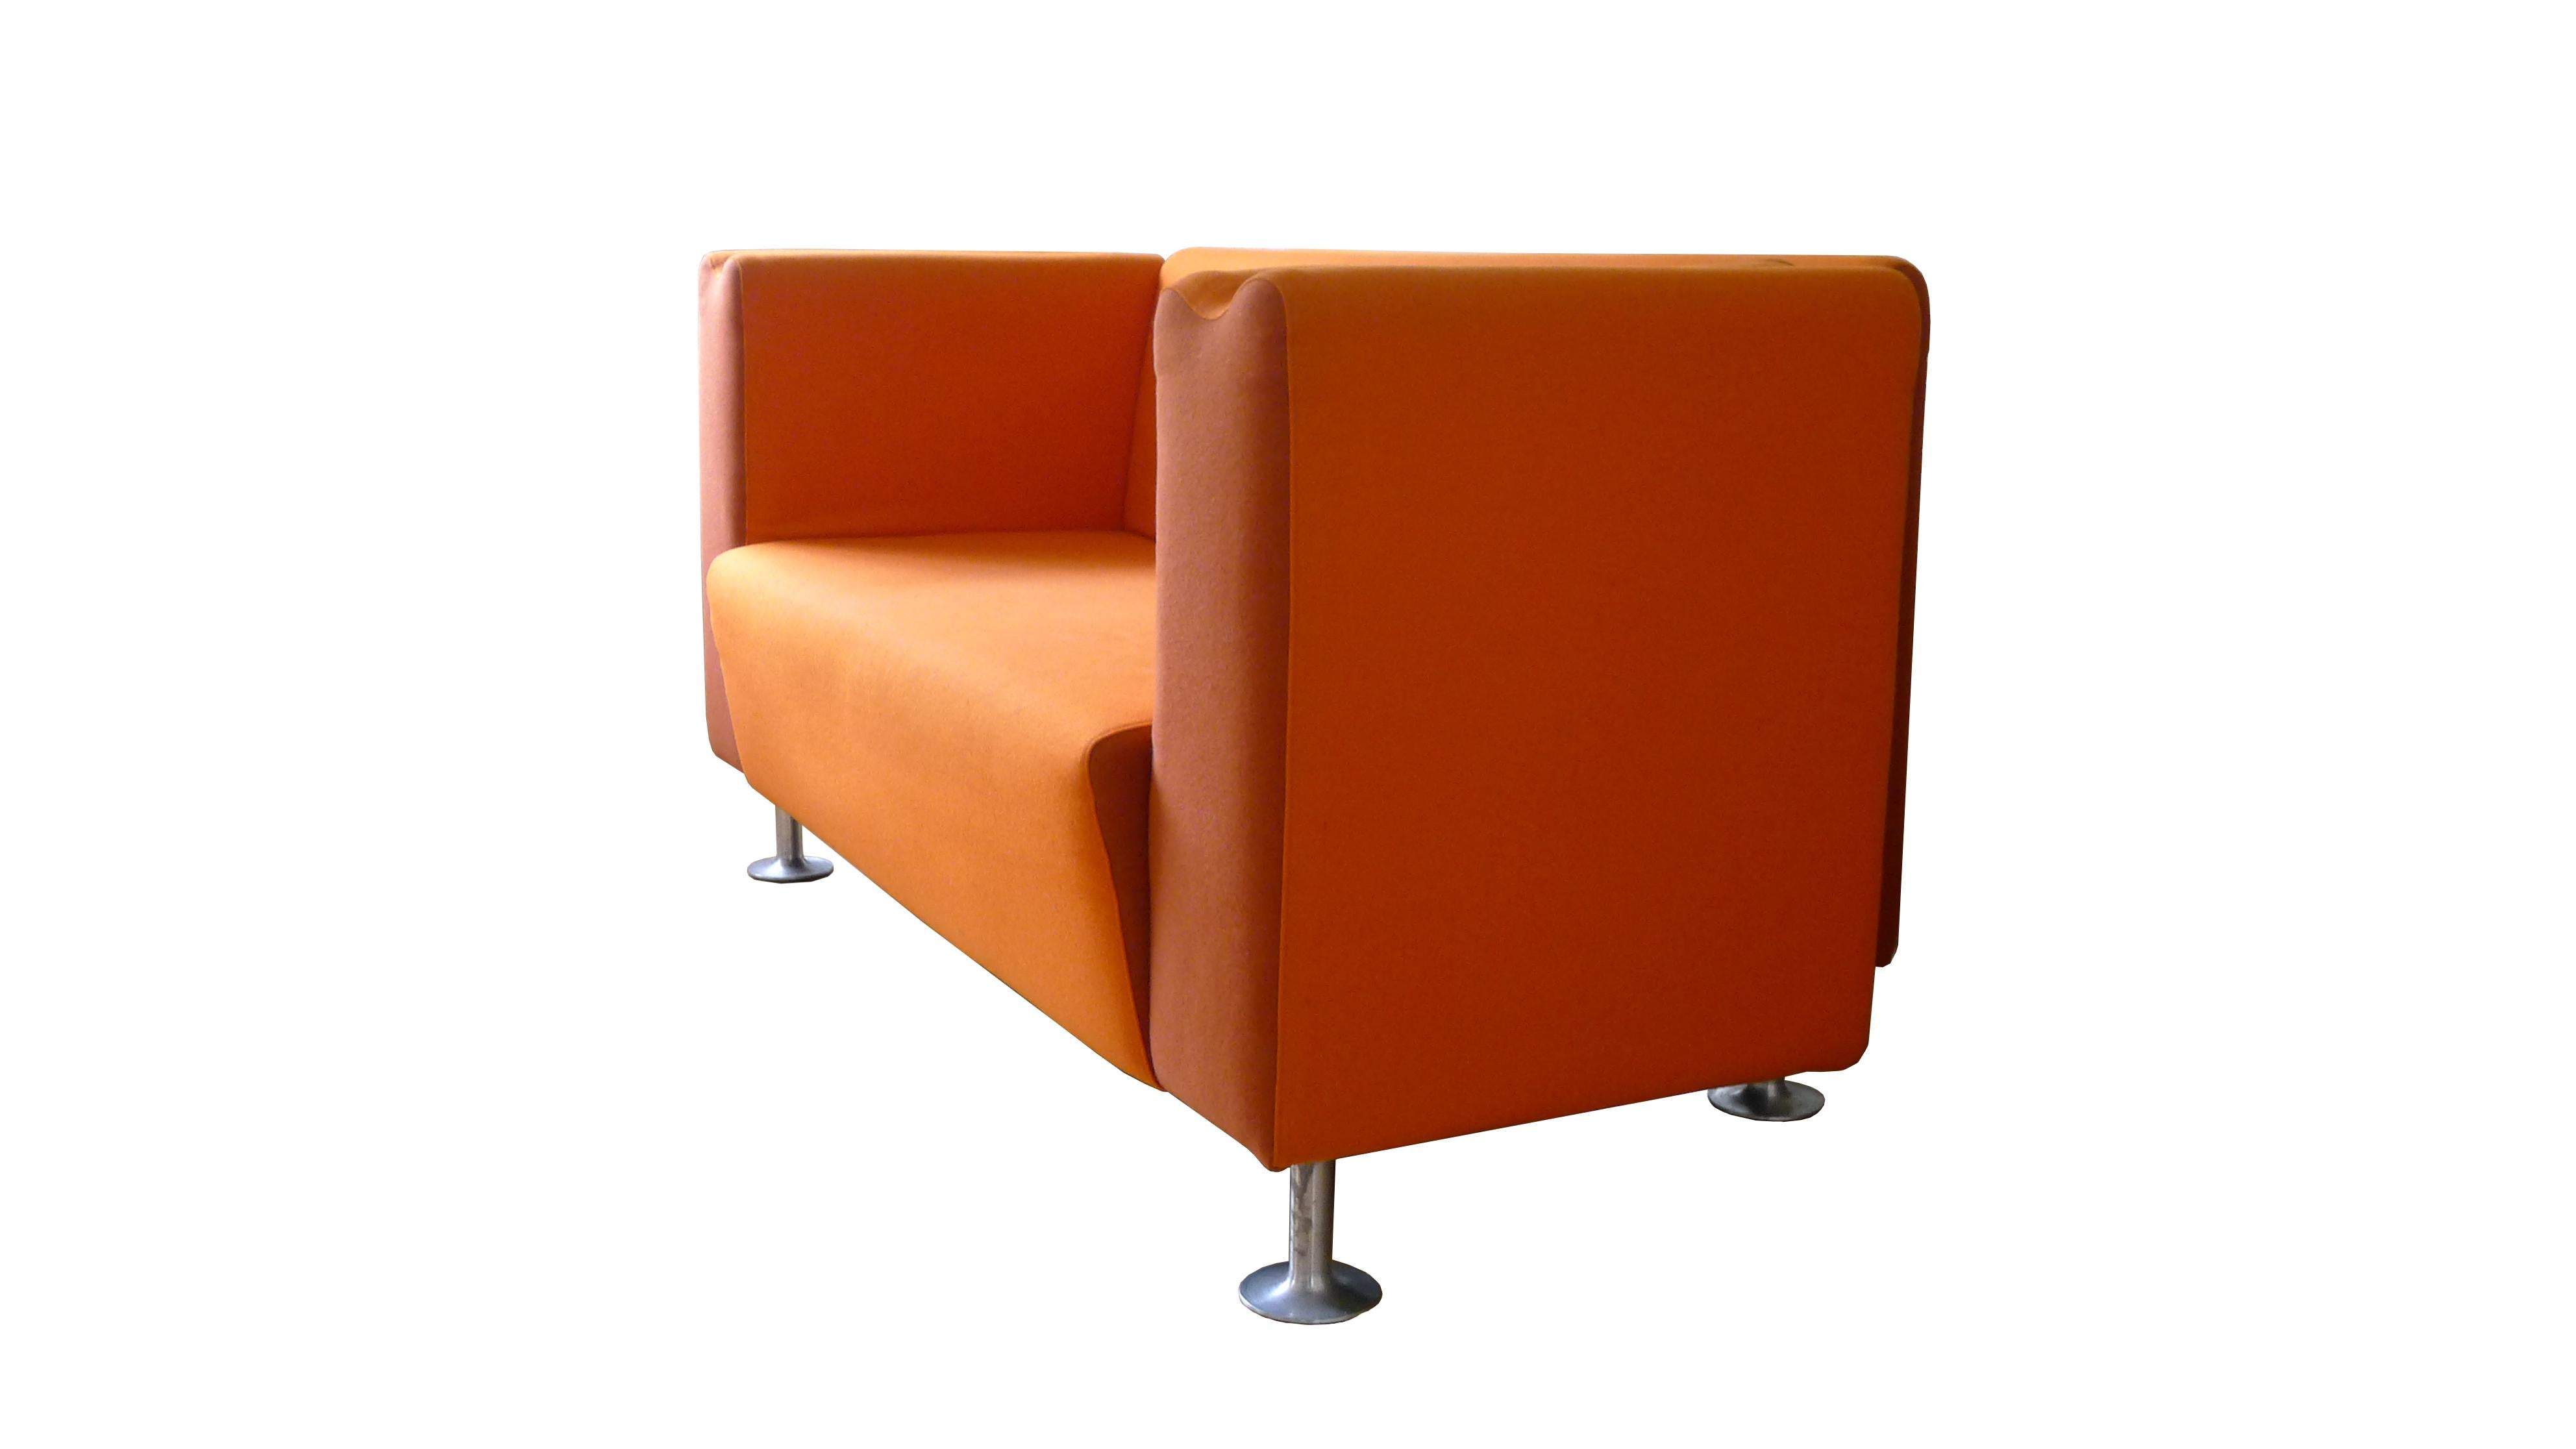 M Collection, Moroso by Ross Lovegrove, orange kvadrat wool with darker orange panels and aluminium feet. 
The sculpture detail of the 